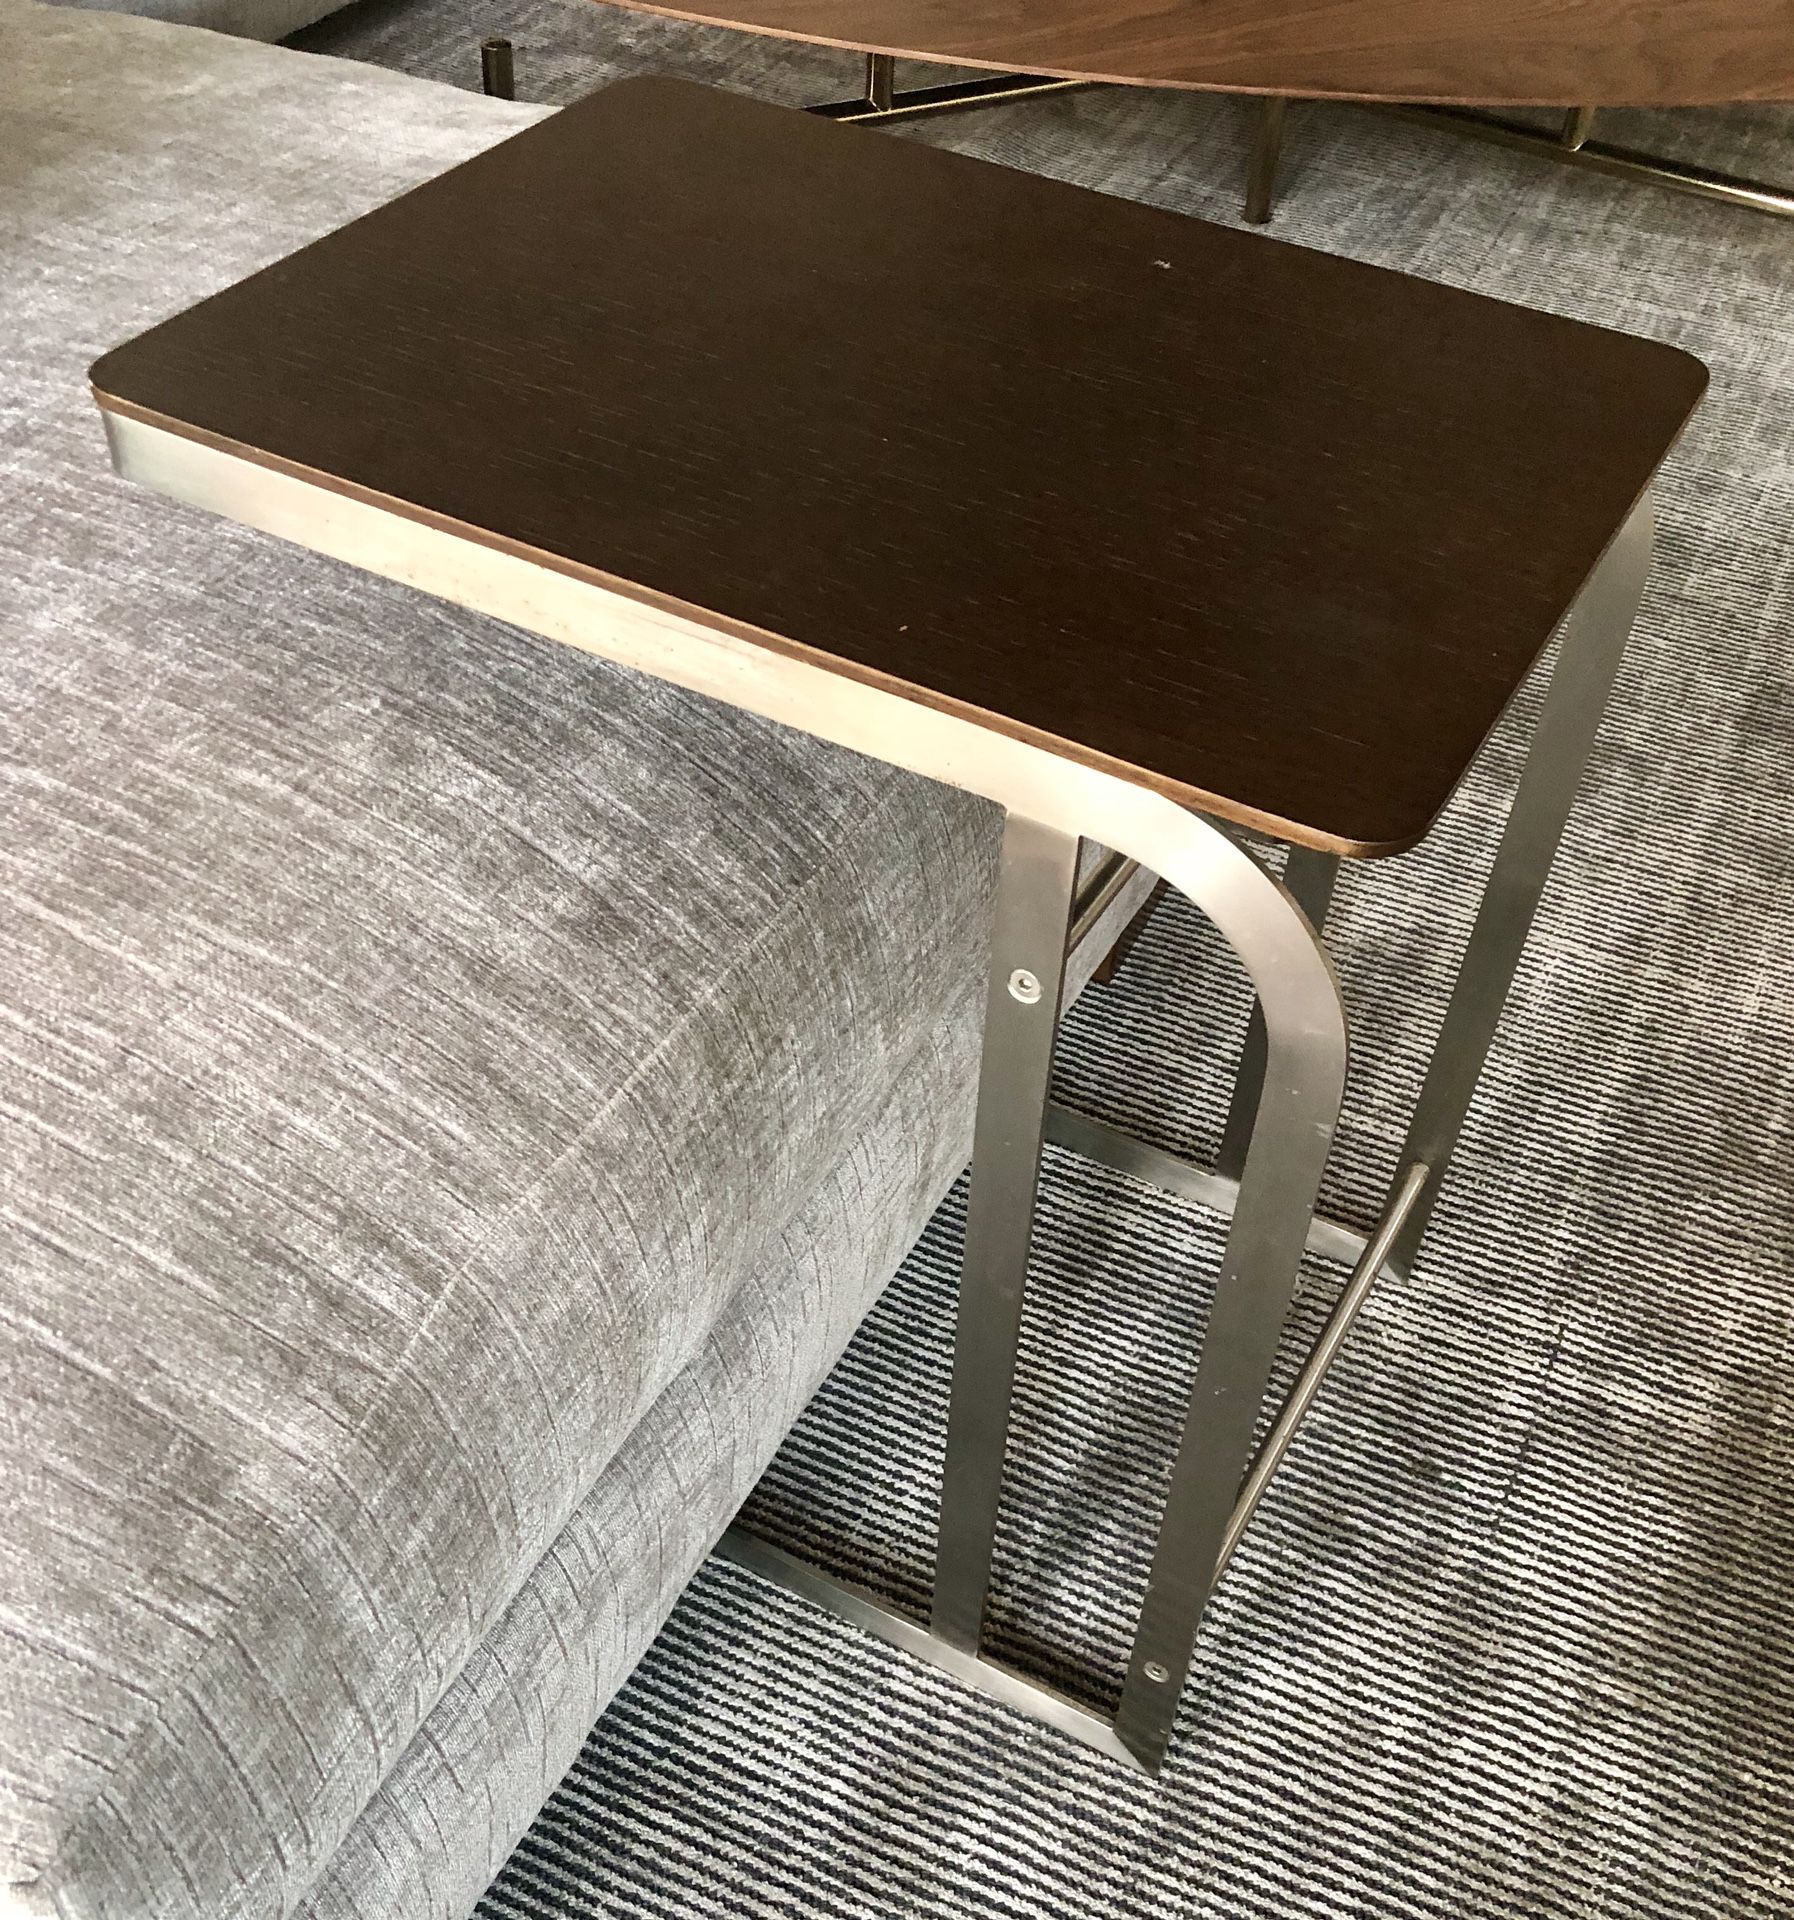 C-shaped end table